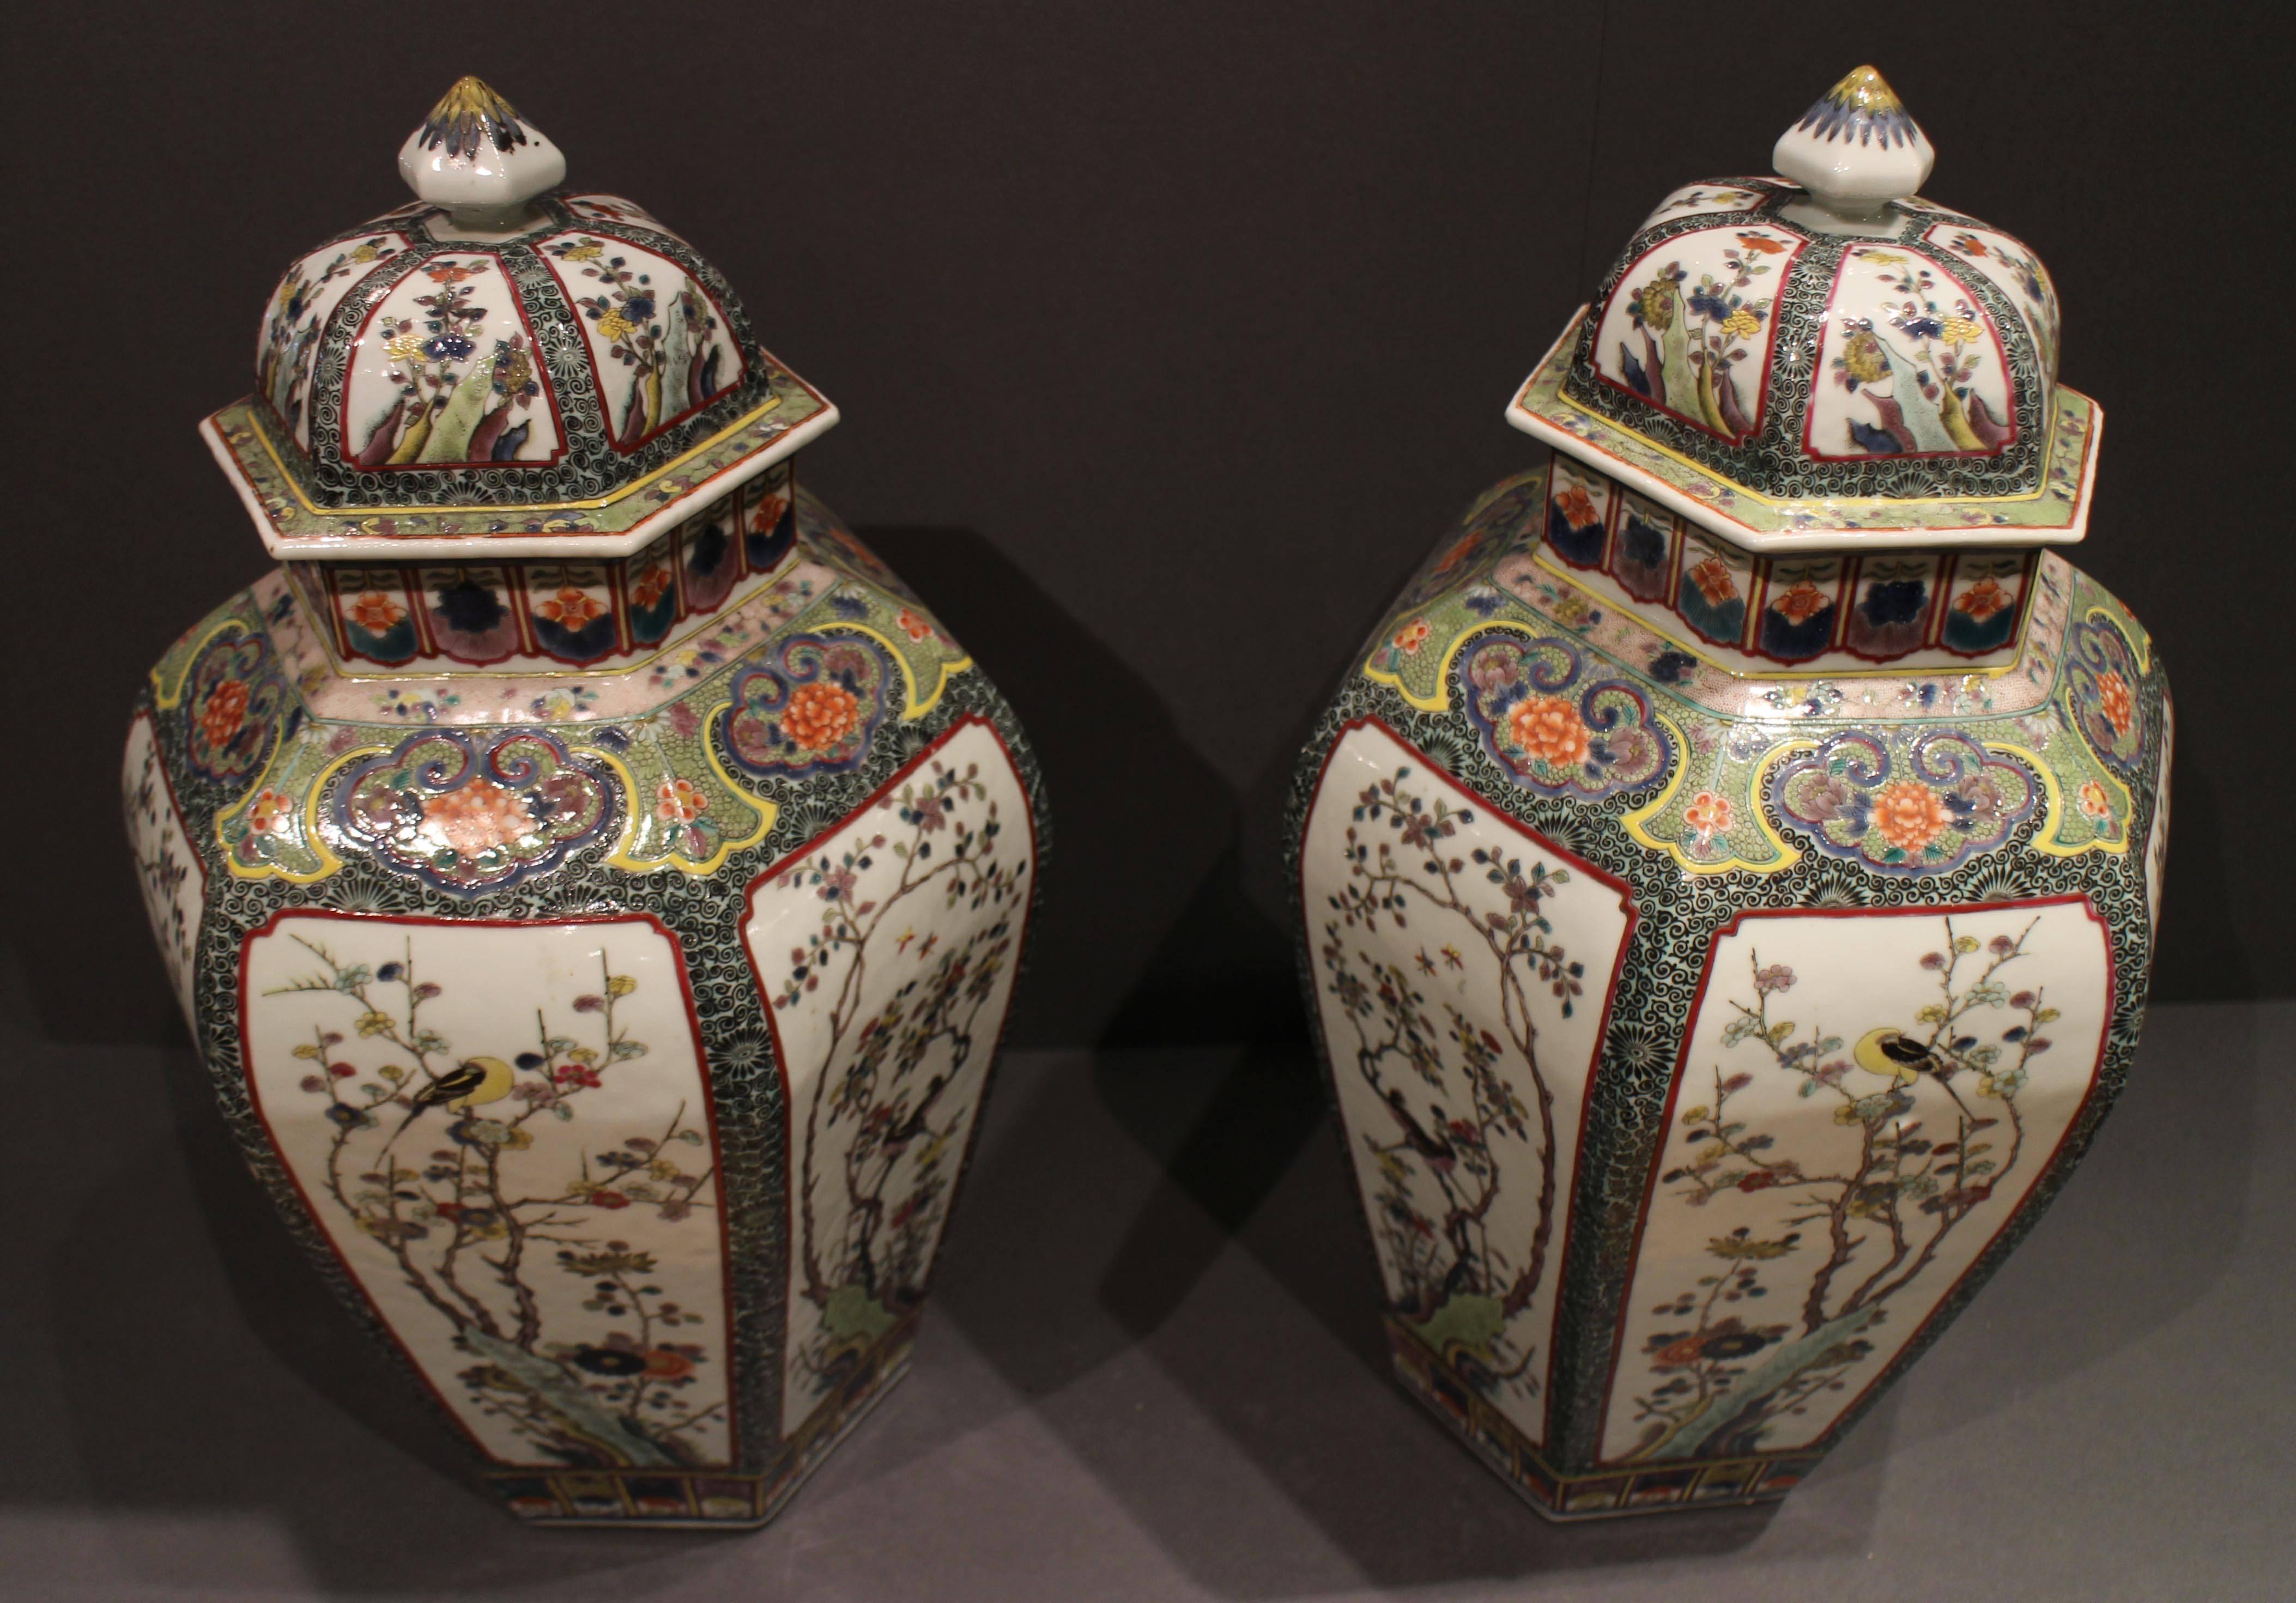 A pair of antique Chinese famille verte vases and covers, the vases are an interesting hexagonal shape, and this combined with a bold, well painted color scheme make a very striking pair of vases, they are decorated with panels of birds and